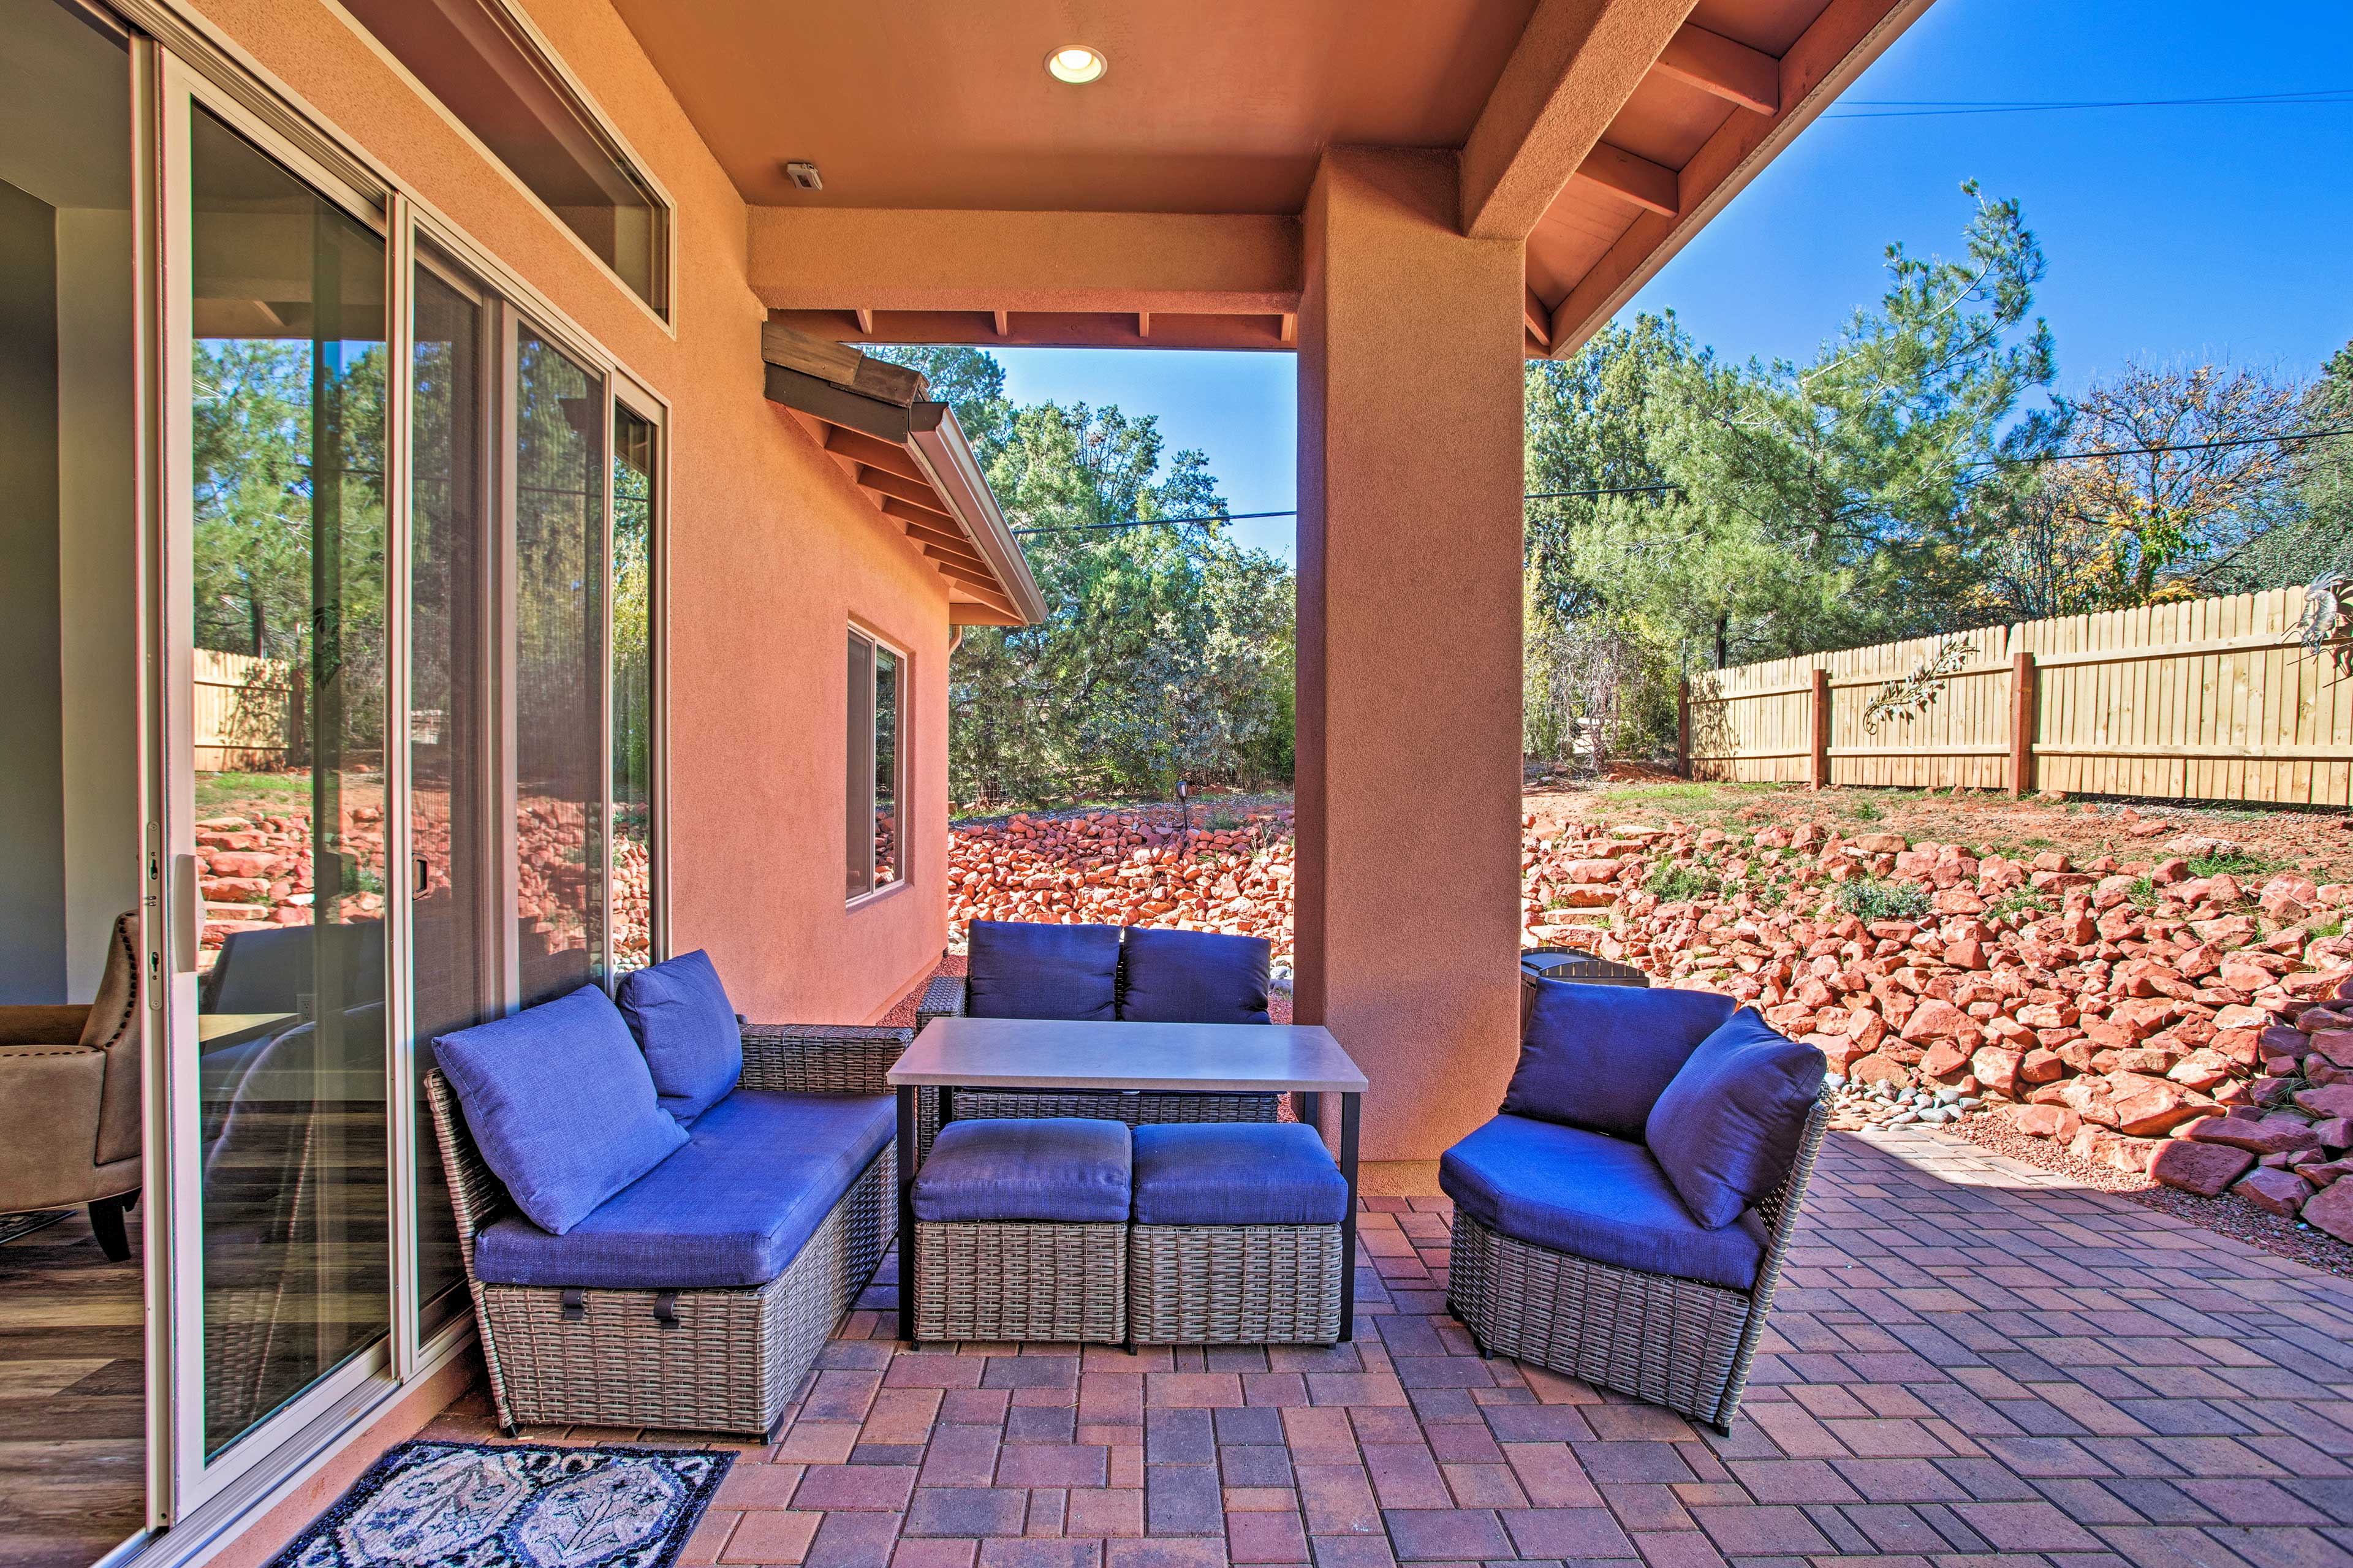 Private Yard | Outdoor Seating & Dining Area